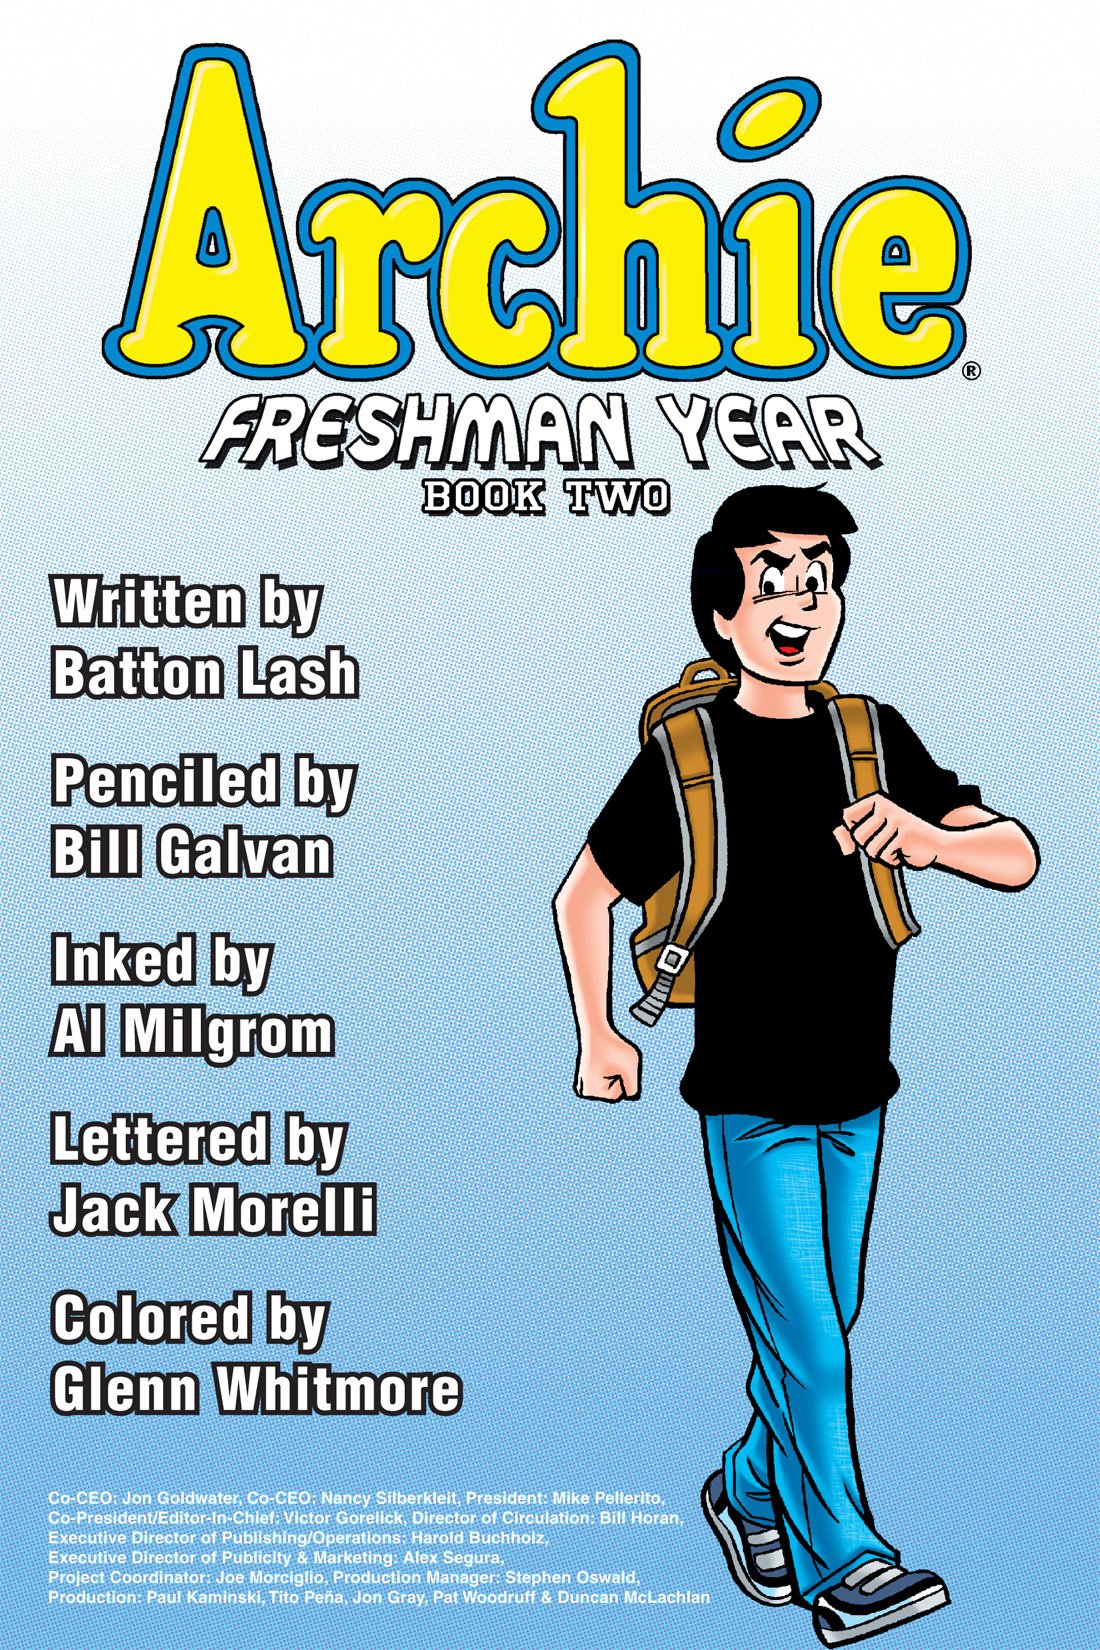 Read online Archie Freshman Year comic -  Issue # TPB 2 - 4